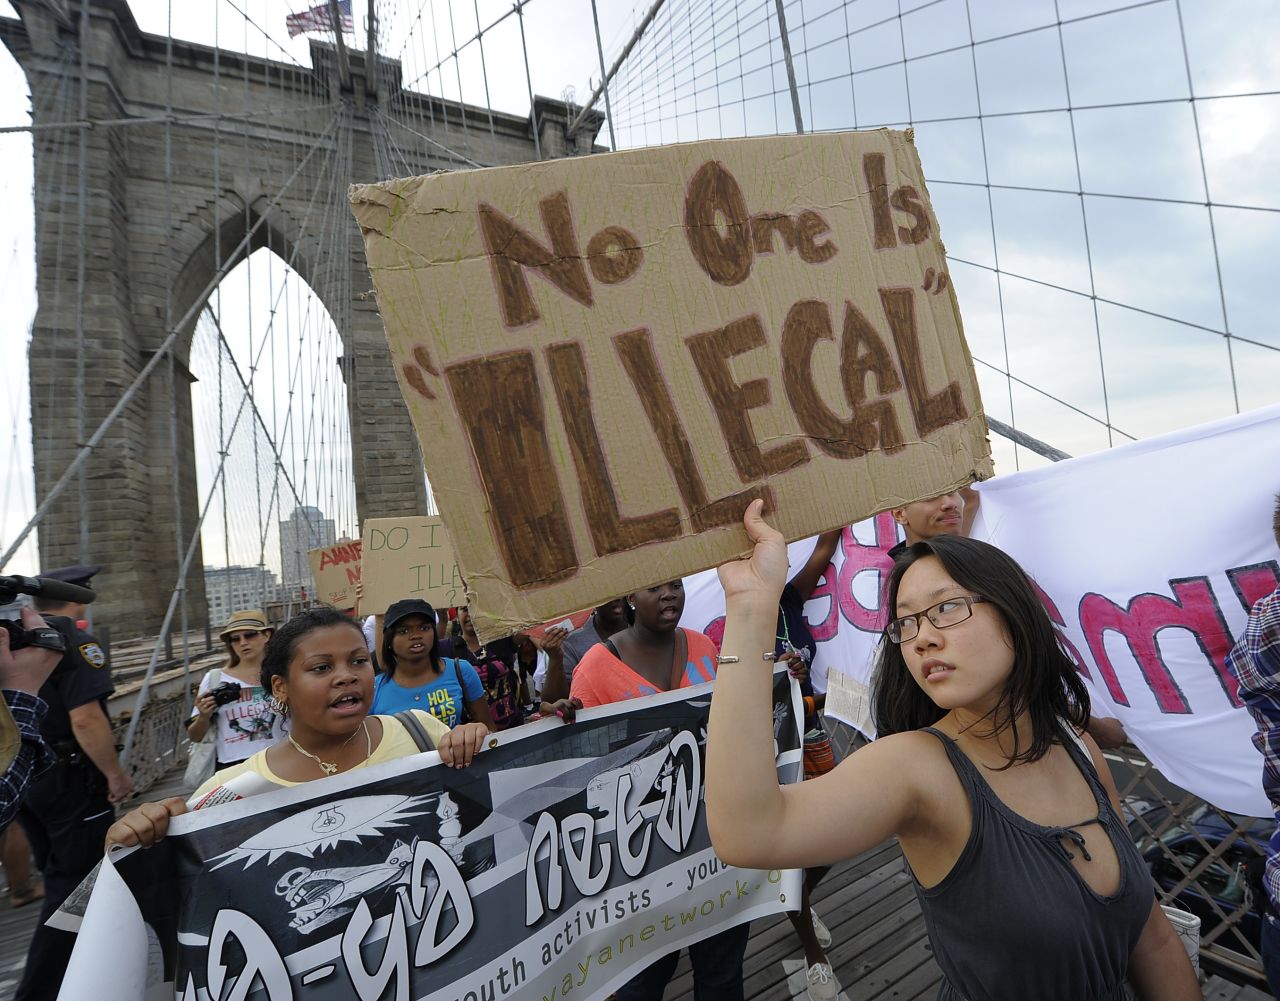 <strong>April 2013: </strong>Media organizations, including the Associated Press and <a href="http://www.cnn.com/2013/04/04/us/illegal-immigrant-term-still-a-challenge">CNN, updated standards in the use of the term "illegal immigrant</a>" in reporting.<br /><br />"There is certainly a more widespread awareness that terminology is contentious and part of the overall political battle for immigration reform," said Lina Newton, an associate professor of political science at Hunter College and author of "Illegal, Alien, or Immigrant: The Politics of Immigration Reform."<br />